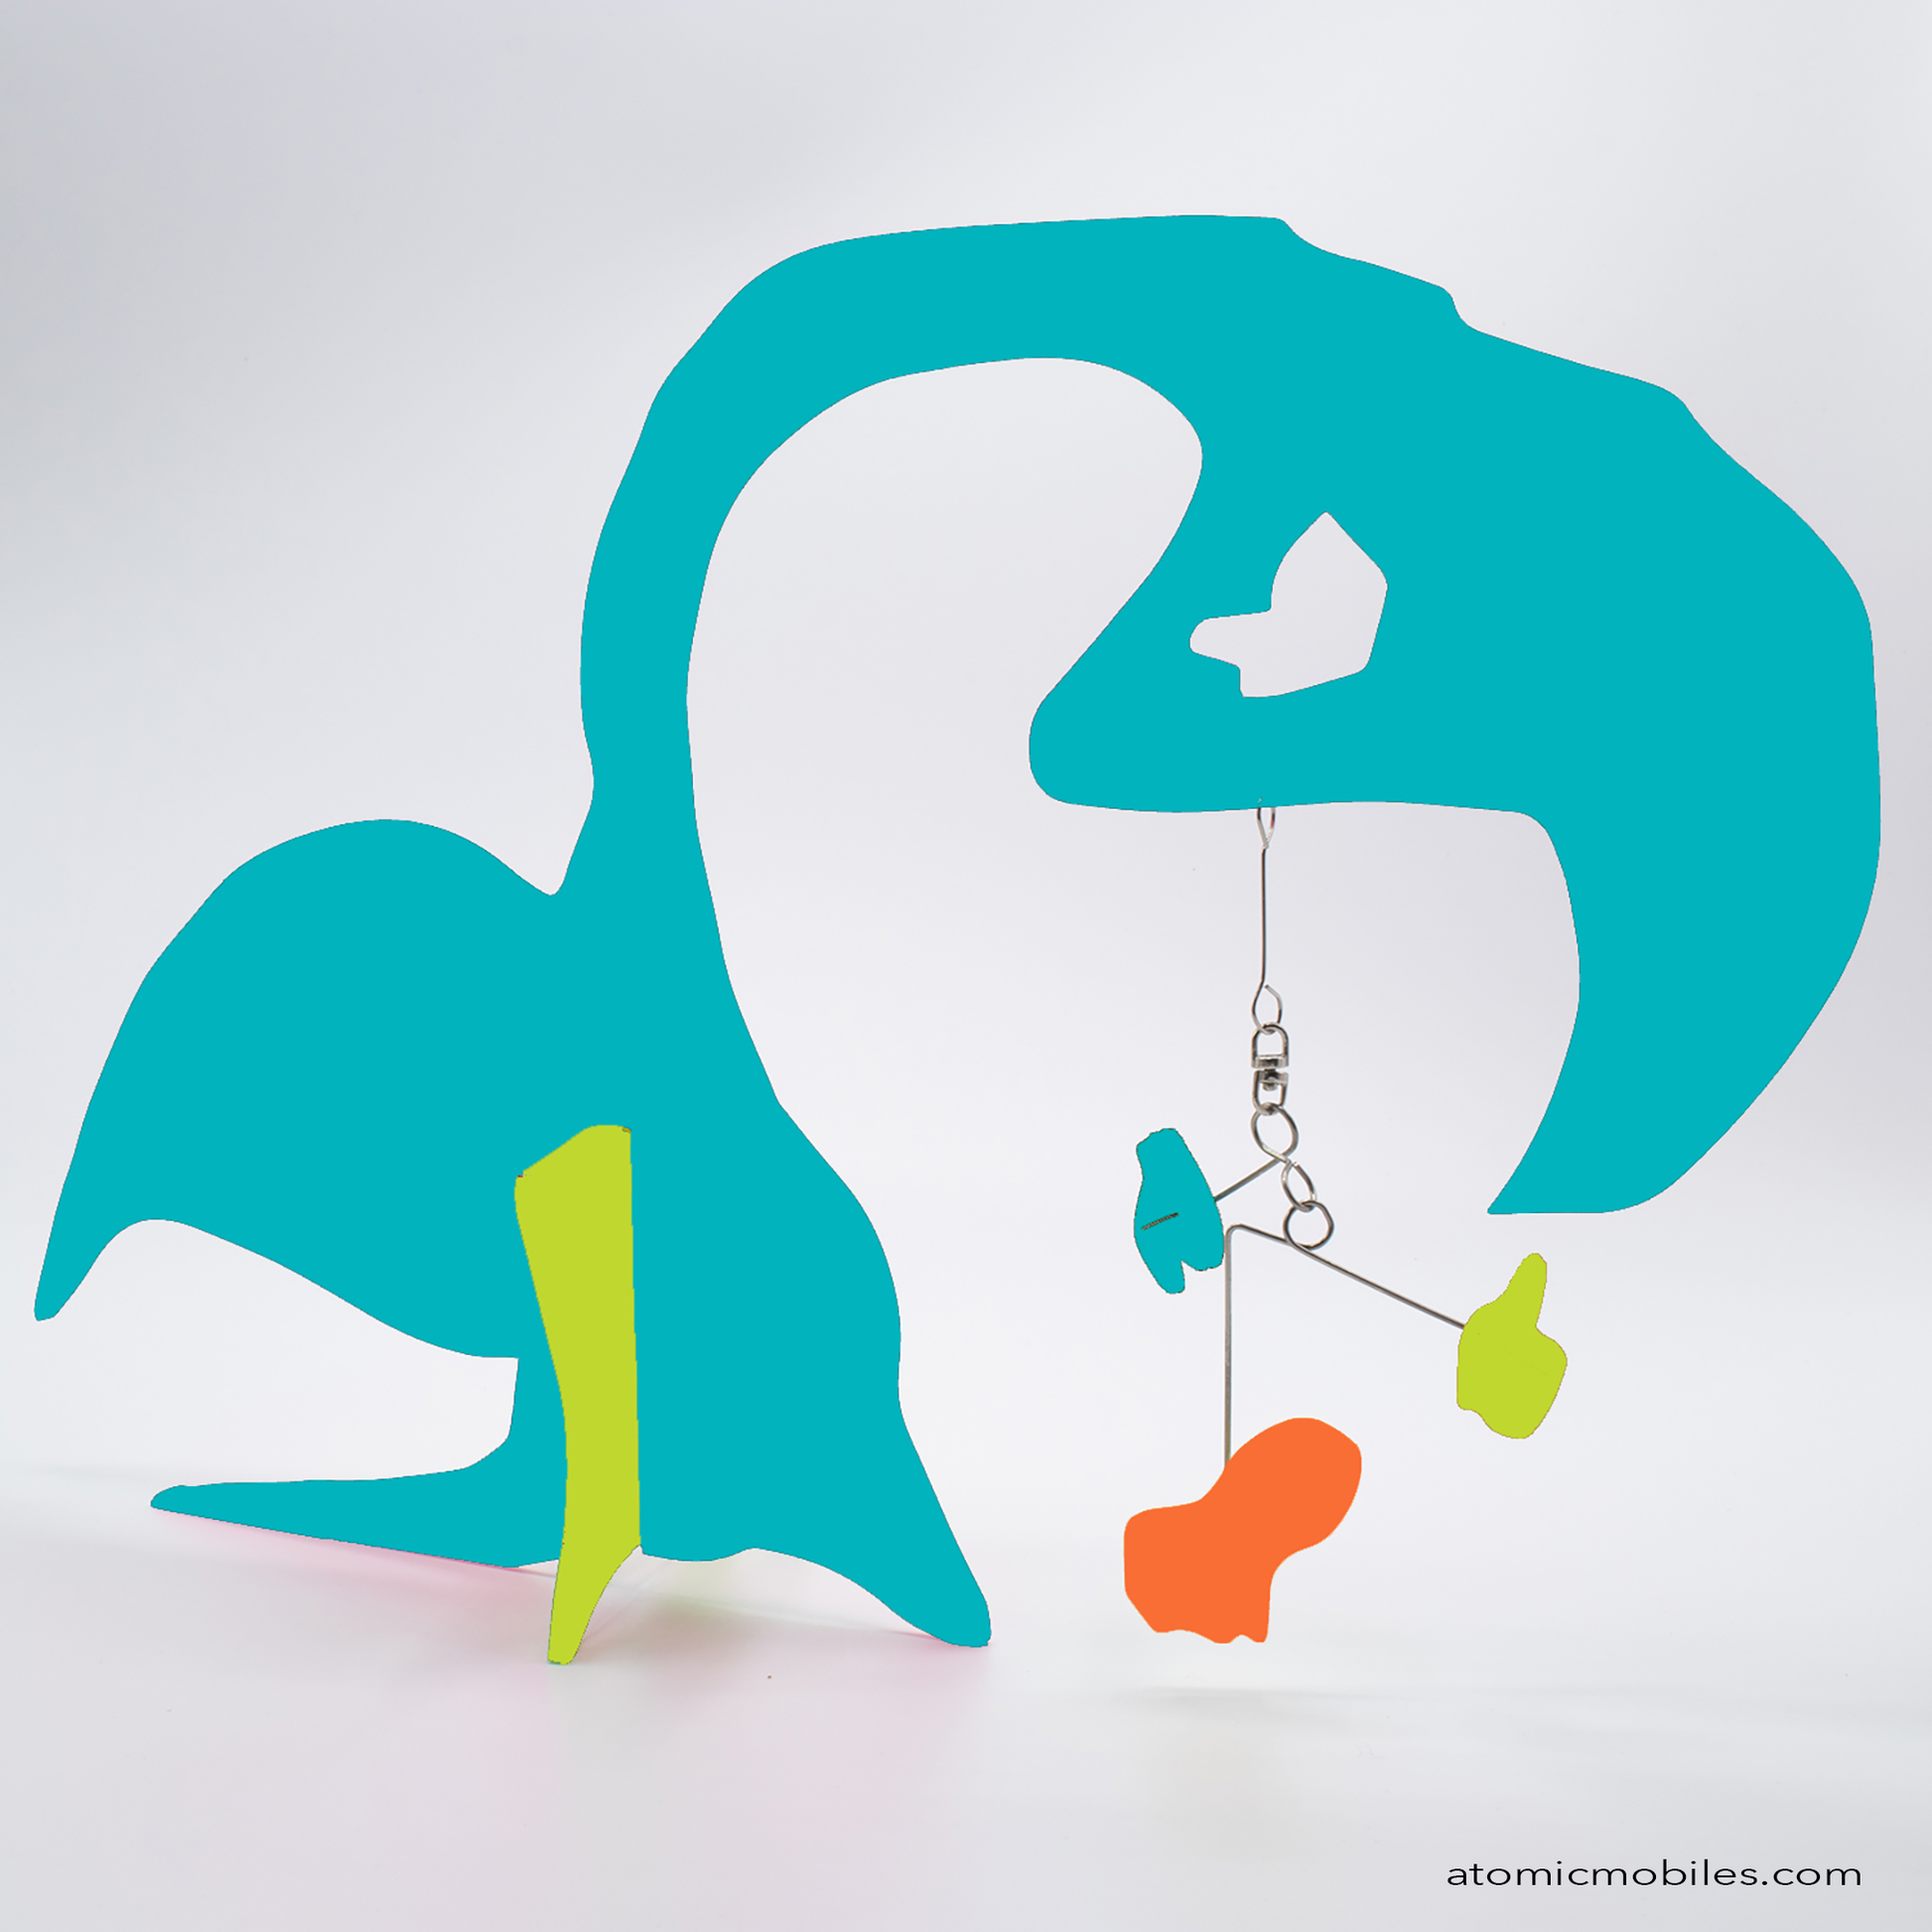 KinetiCats Collection Flamingo in Aqua, Lime Green, Orange - one of 12 Modern Cute Abstract Animal Art Sculpture Kinetic Stabiles inspired by Dada and mid century modern style art by AtomicMobiles.com